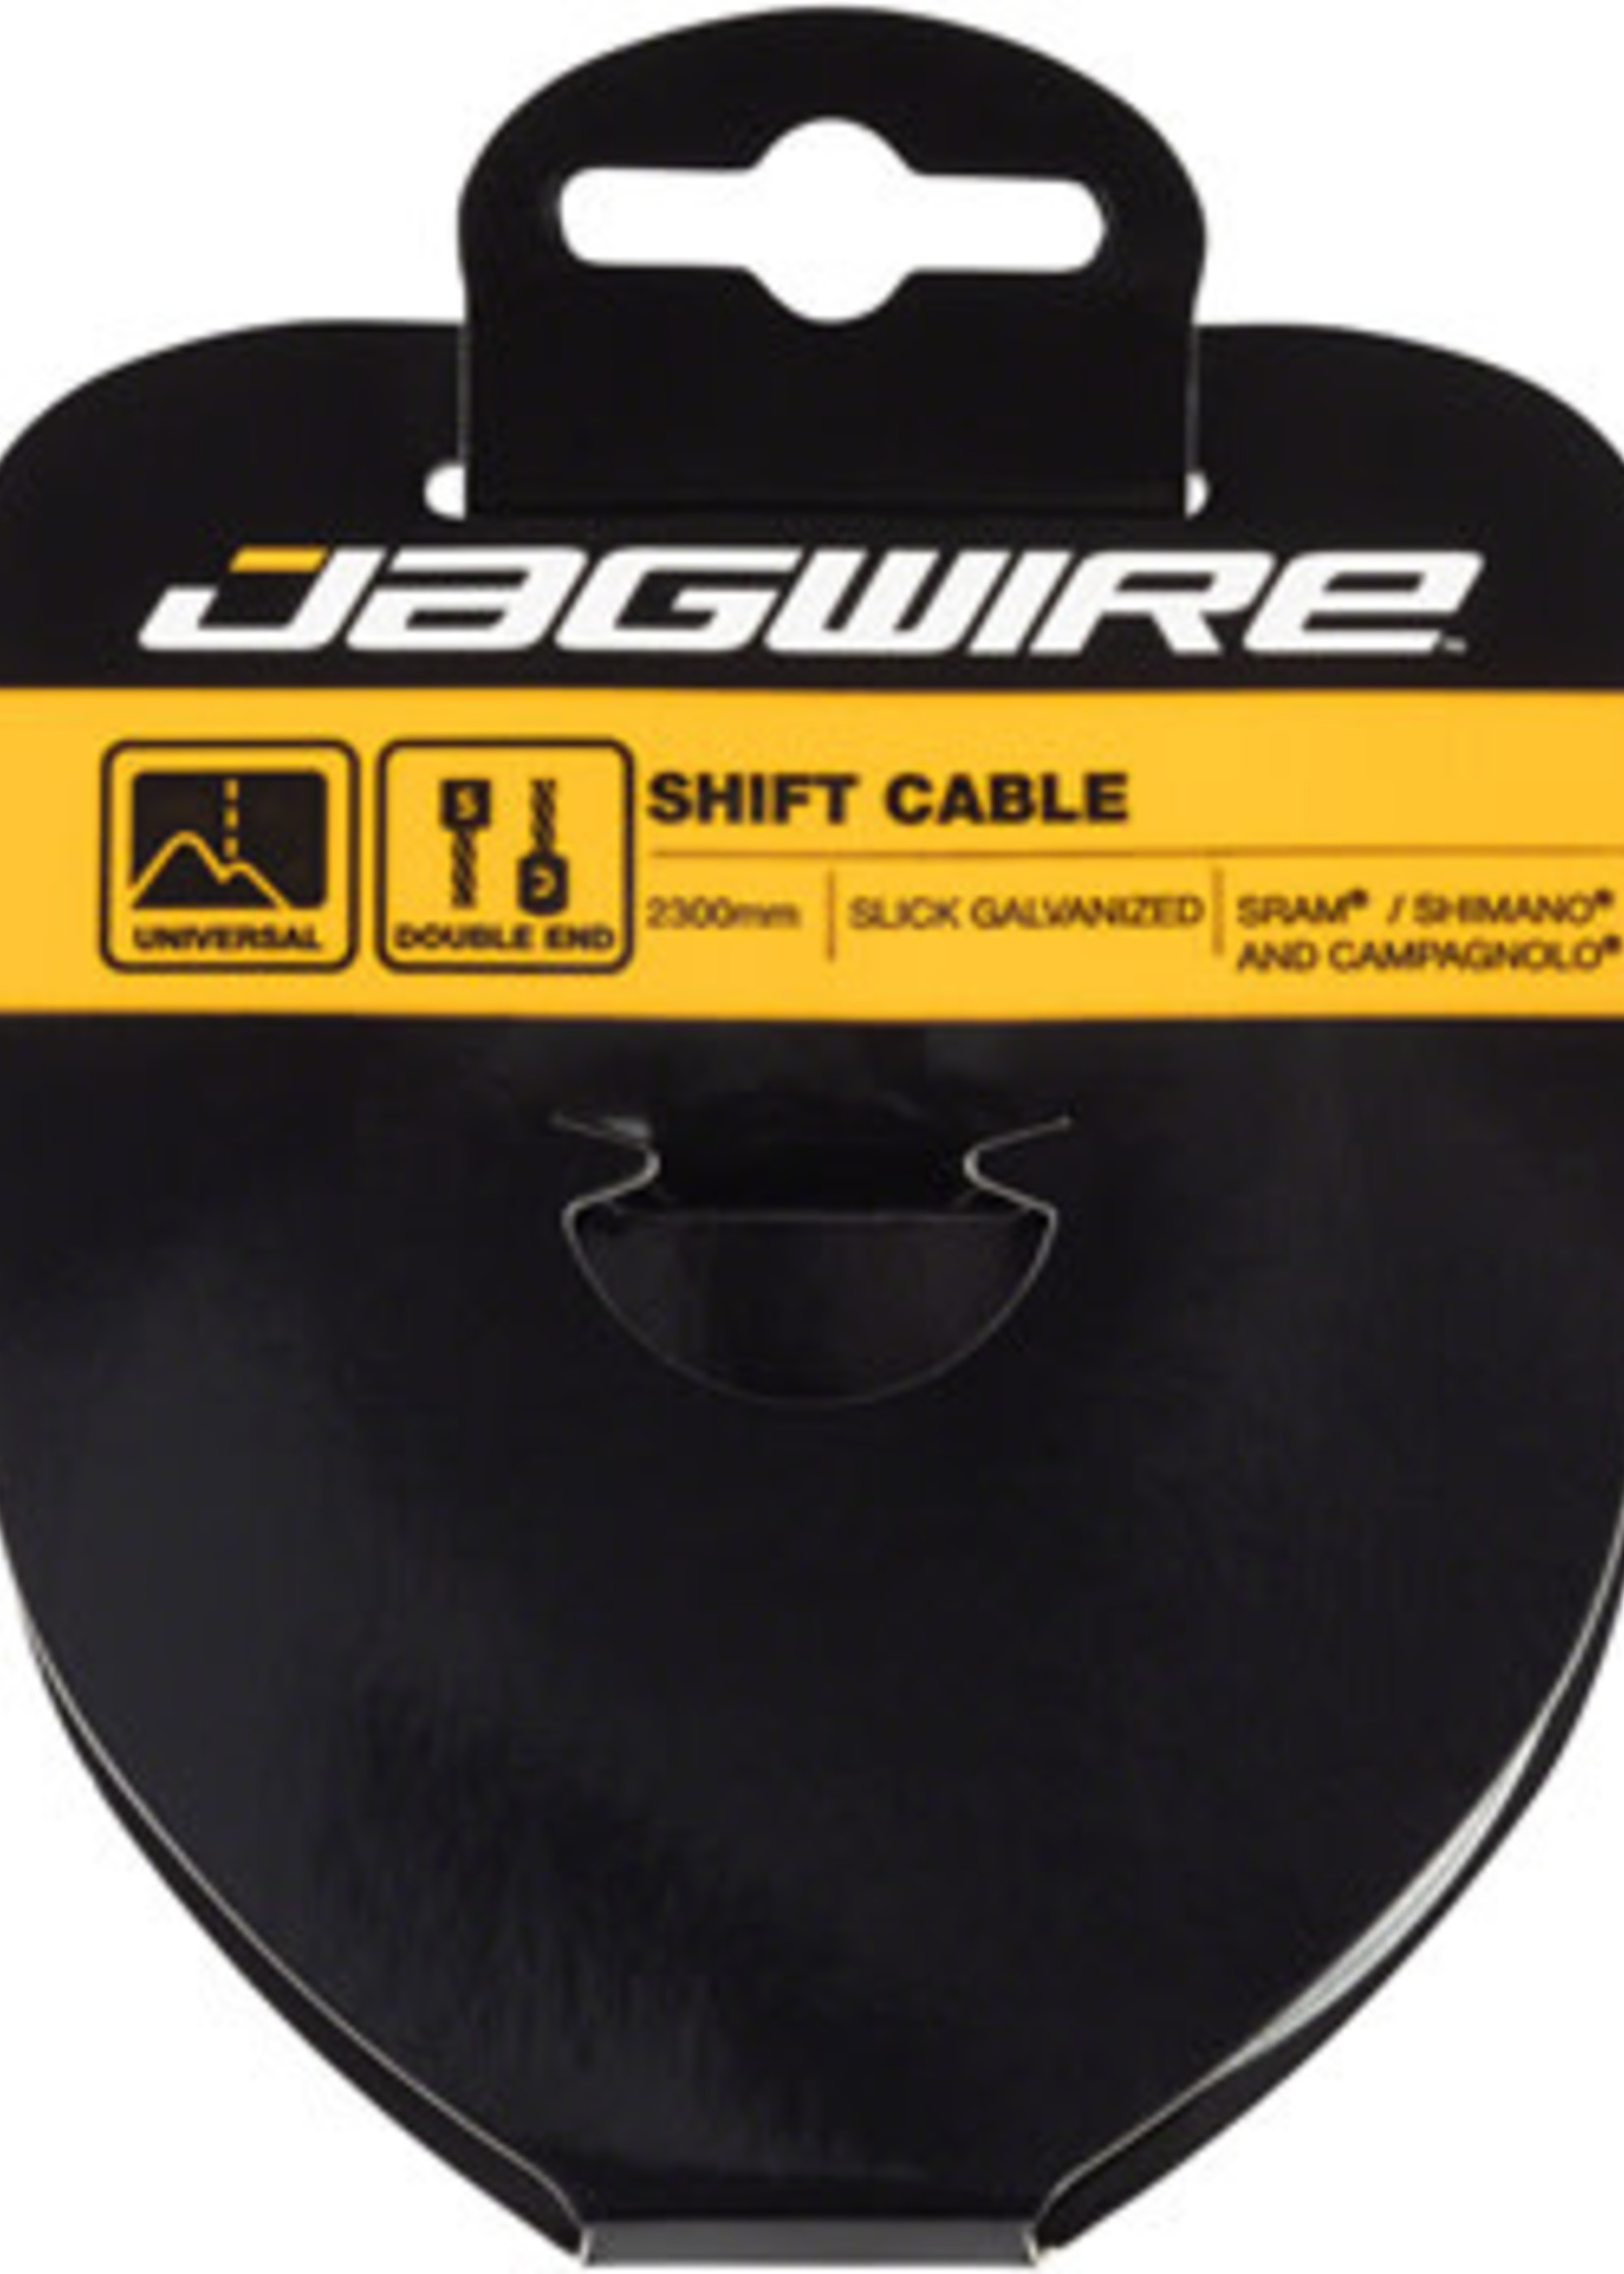 Jagwire Jagwire Sport Shift Cable - 1.1 x 2300mm, Slick Galvanized Steel, For SRAM/Shimano/Campagnolo